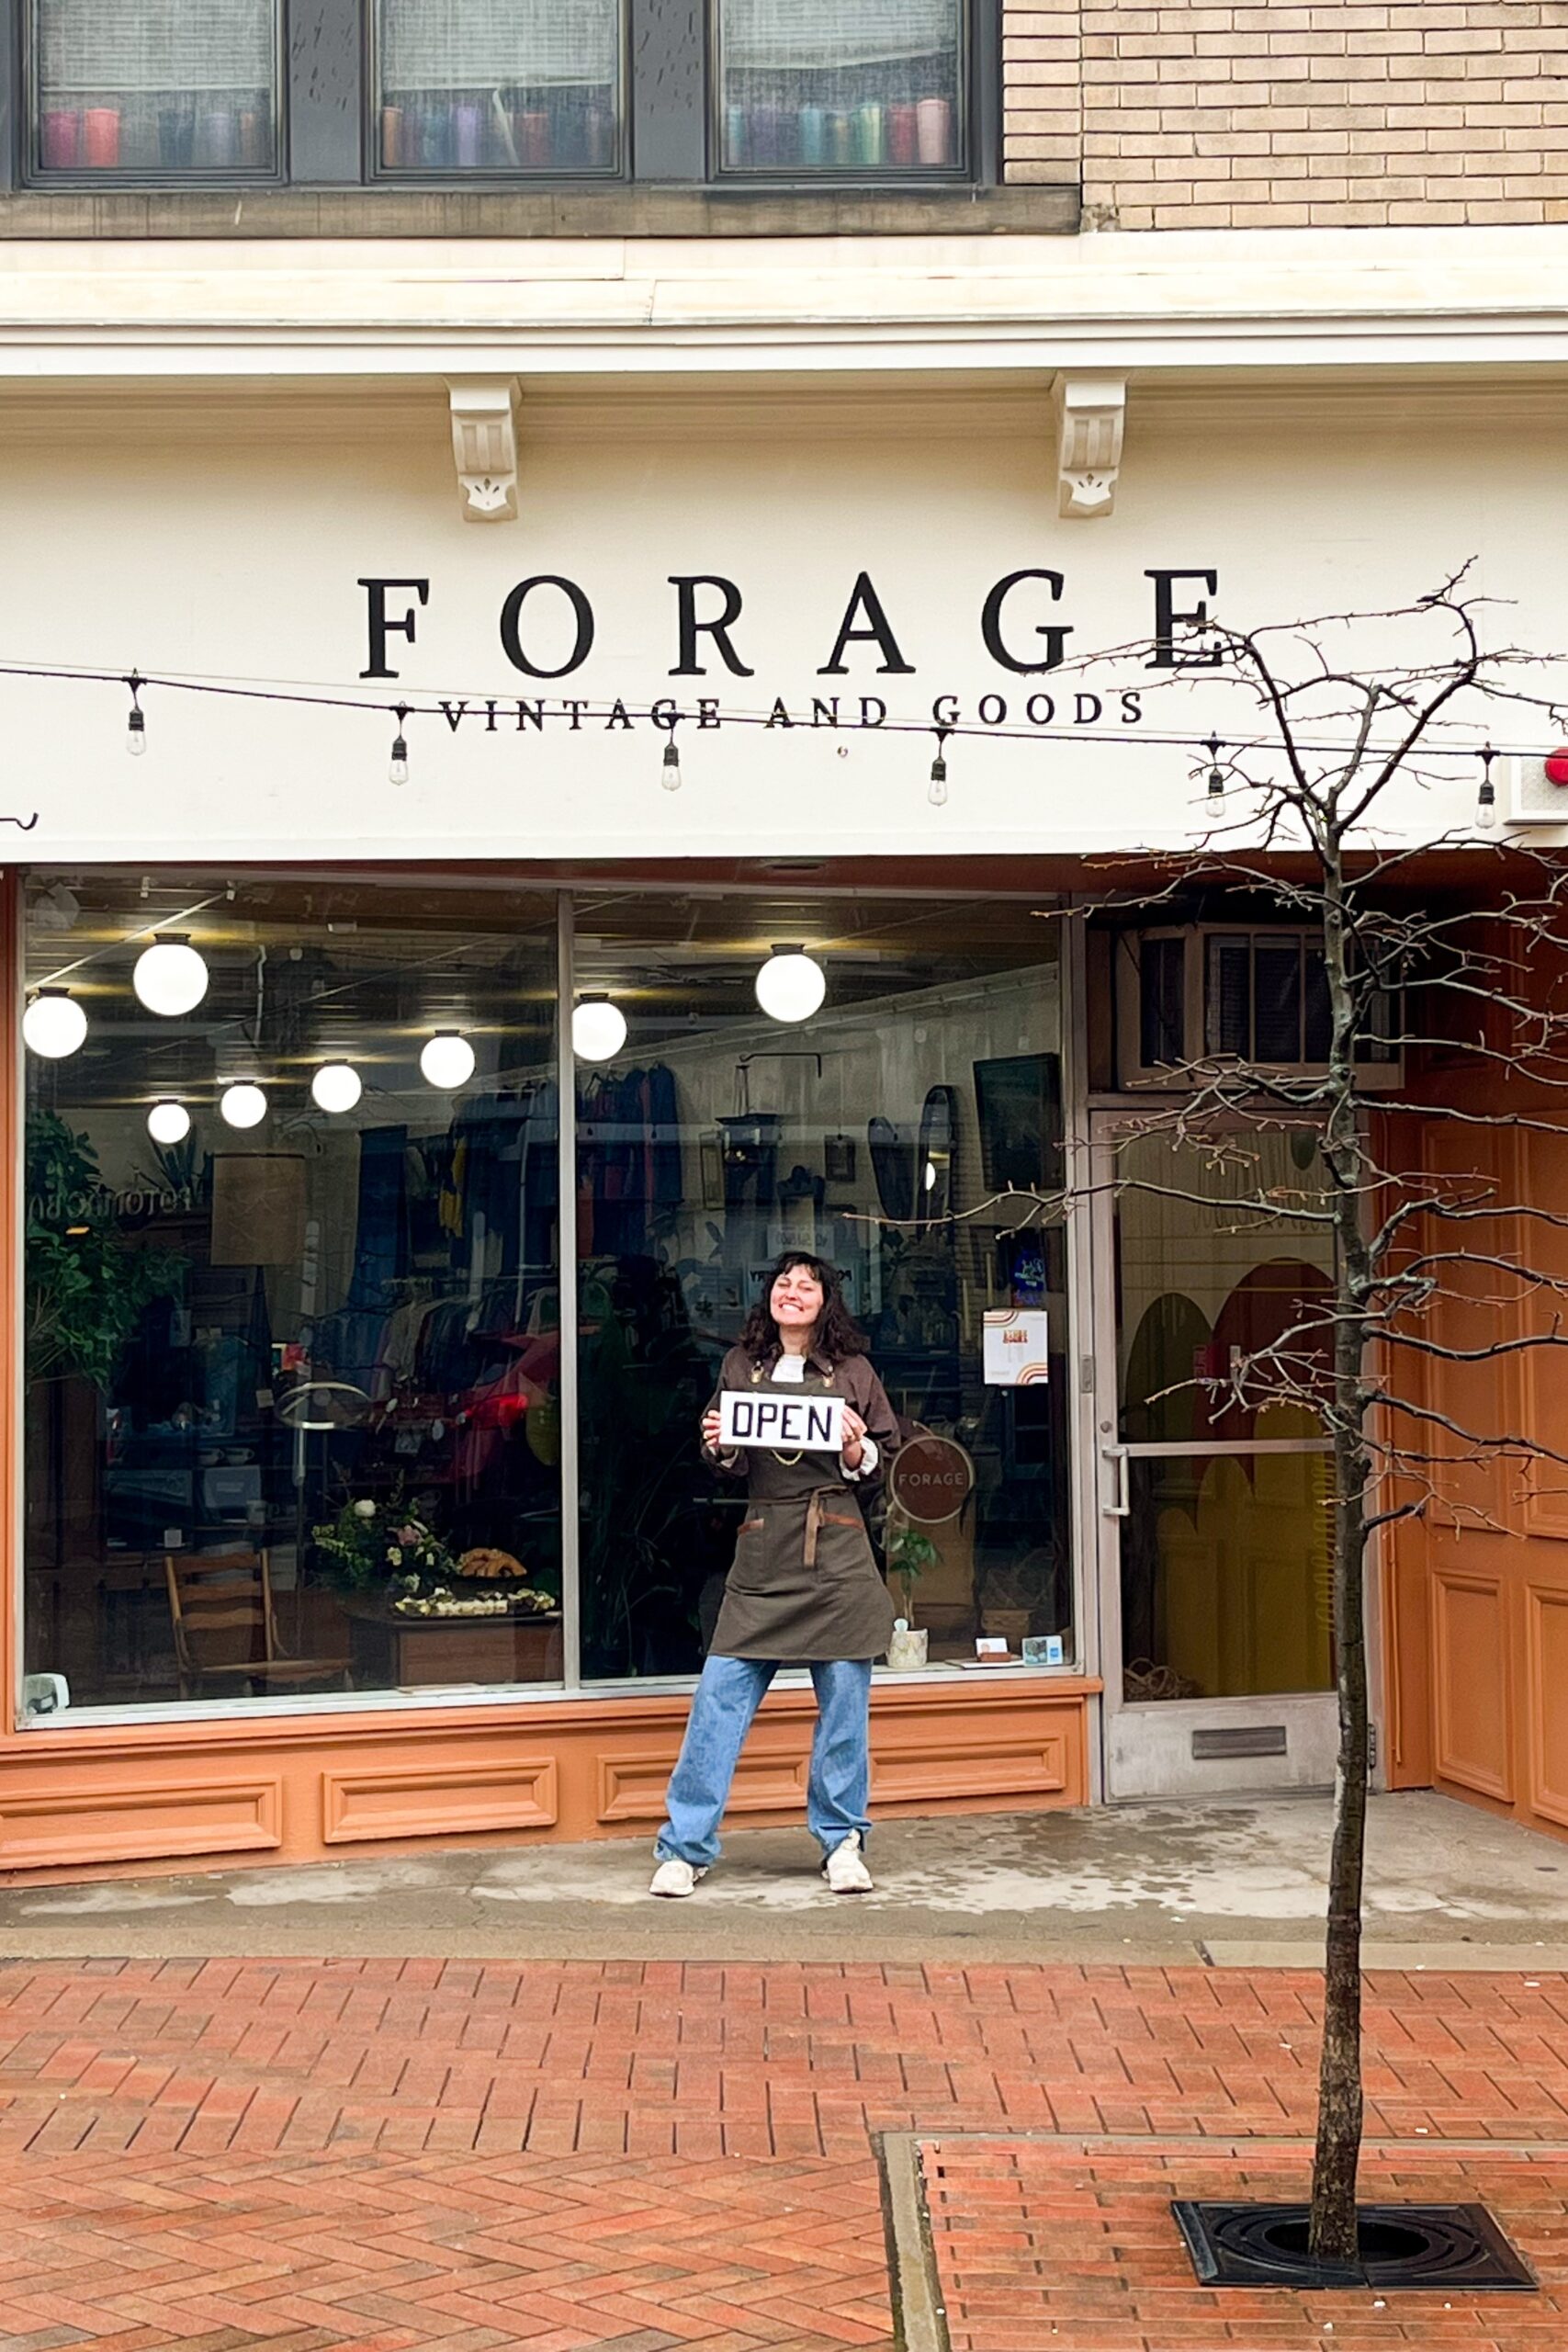 A photo of someone standing outside the Forage Vintage and Goods storefront in Dormont, holding an OPEN sign and smiling.